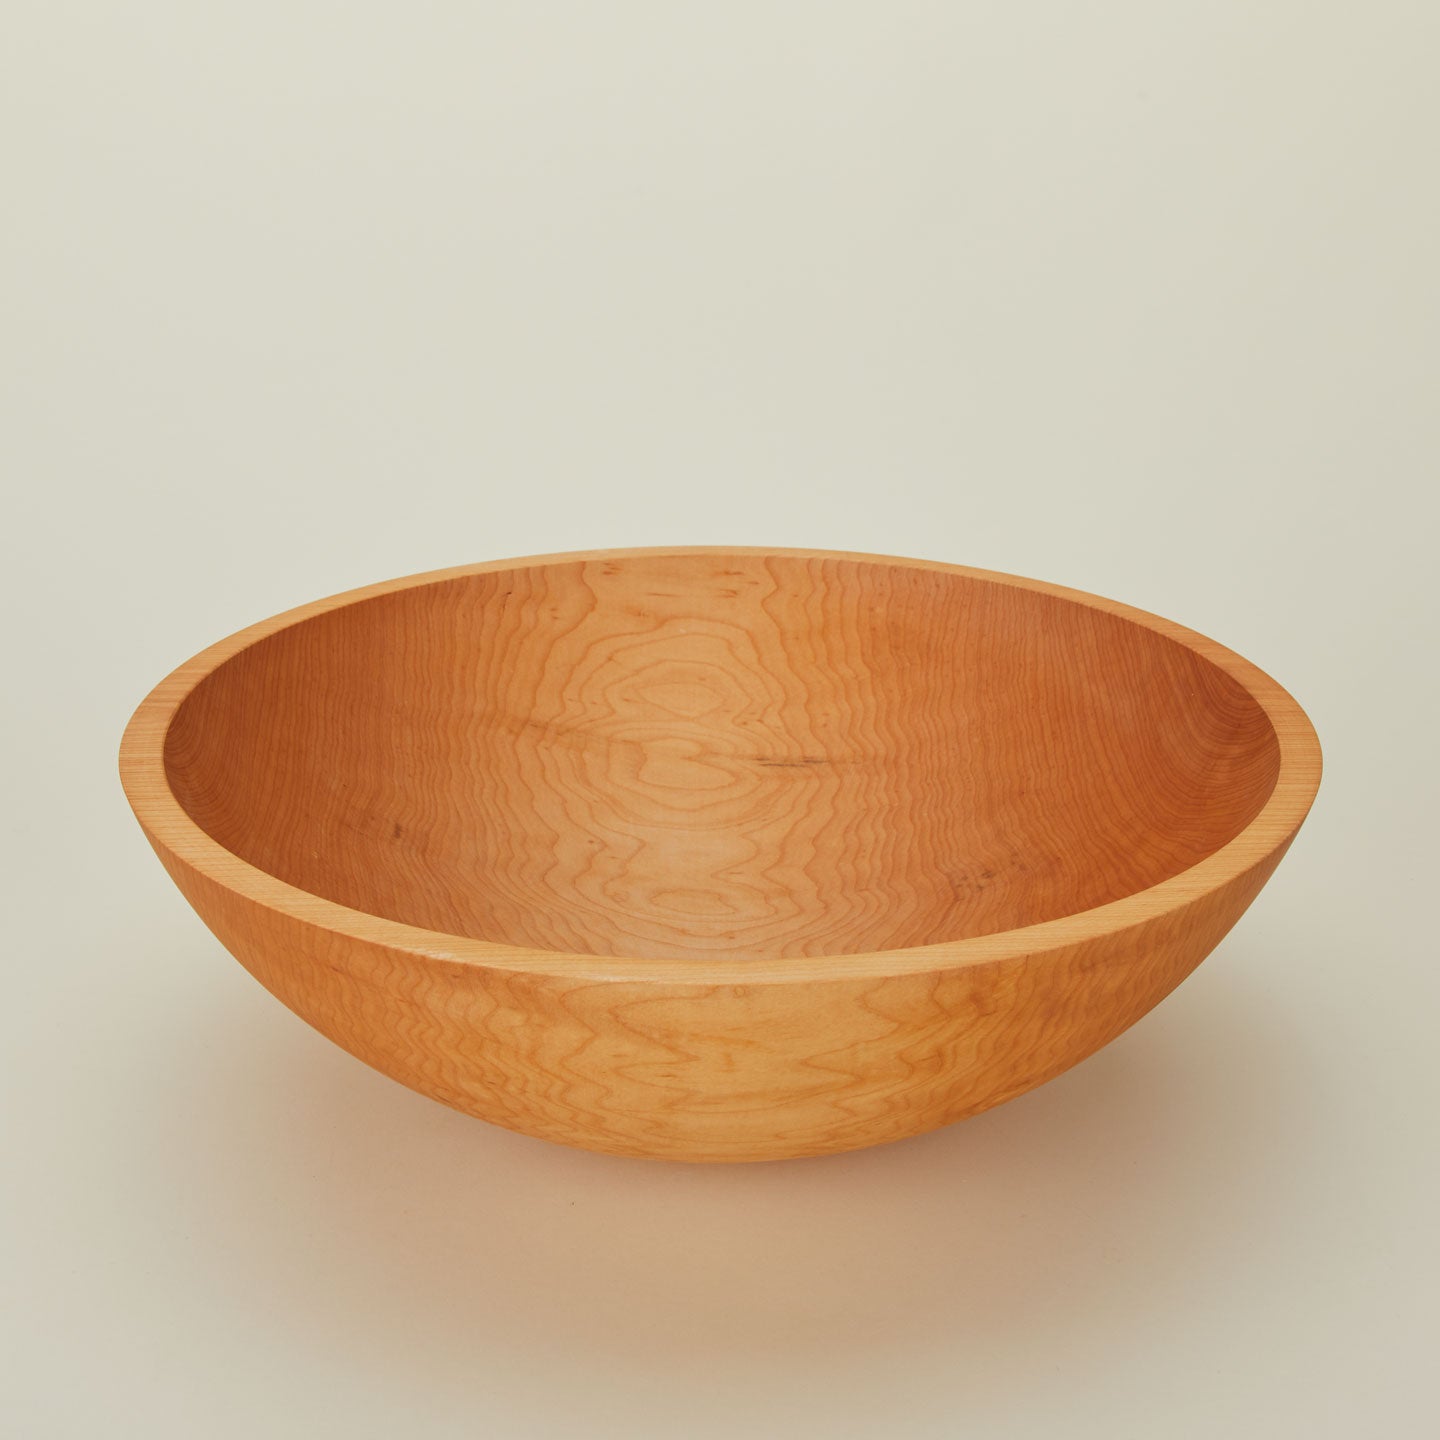 A close up  of a 17” maple wood bowl.